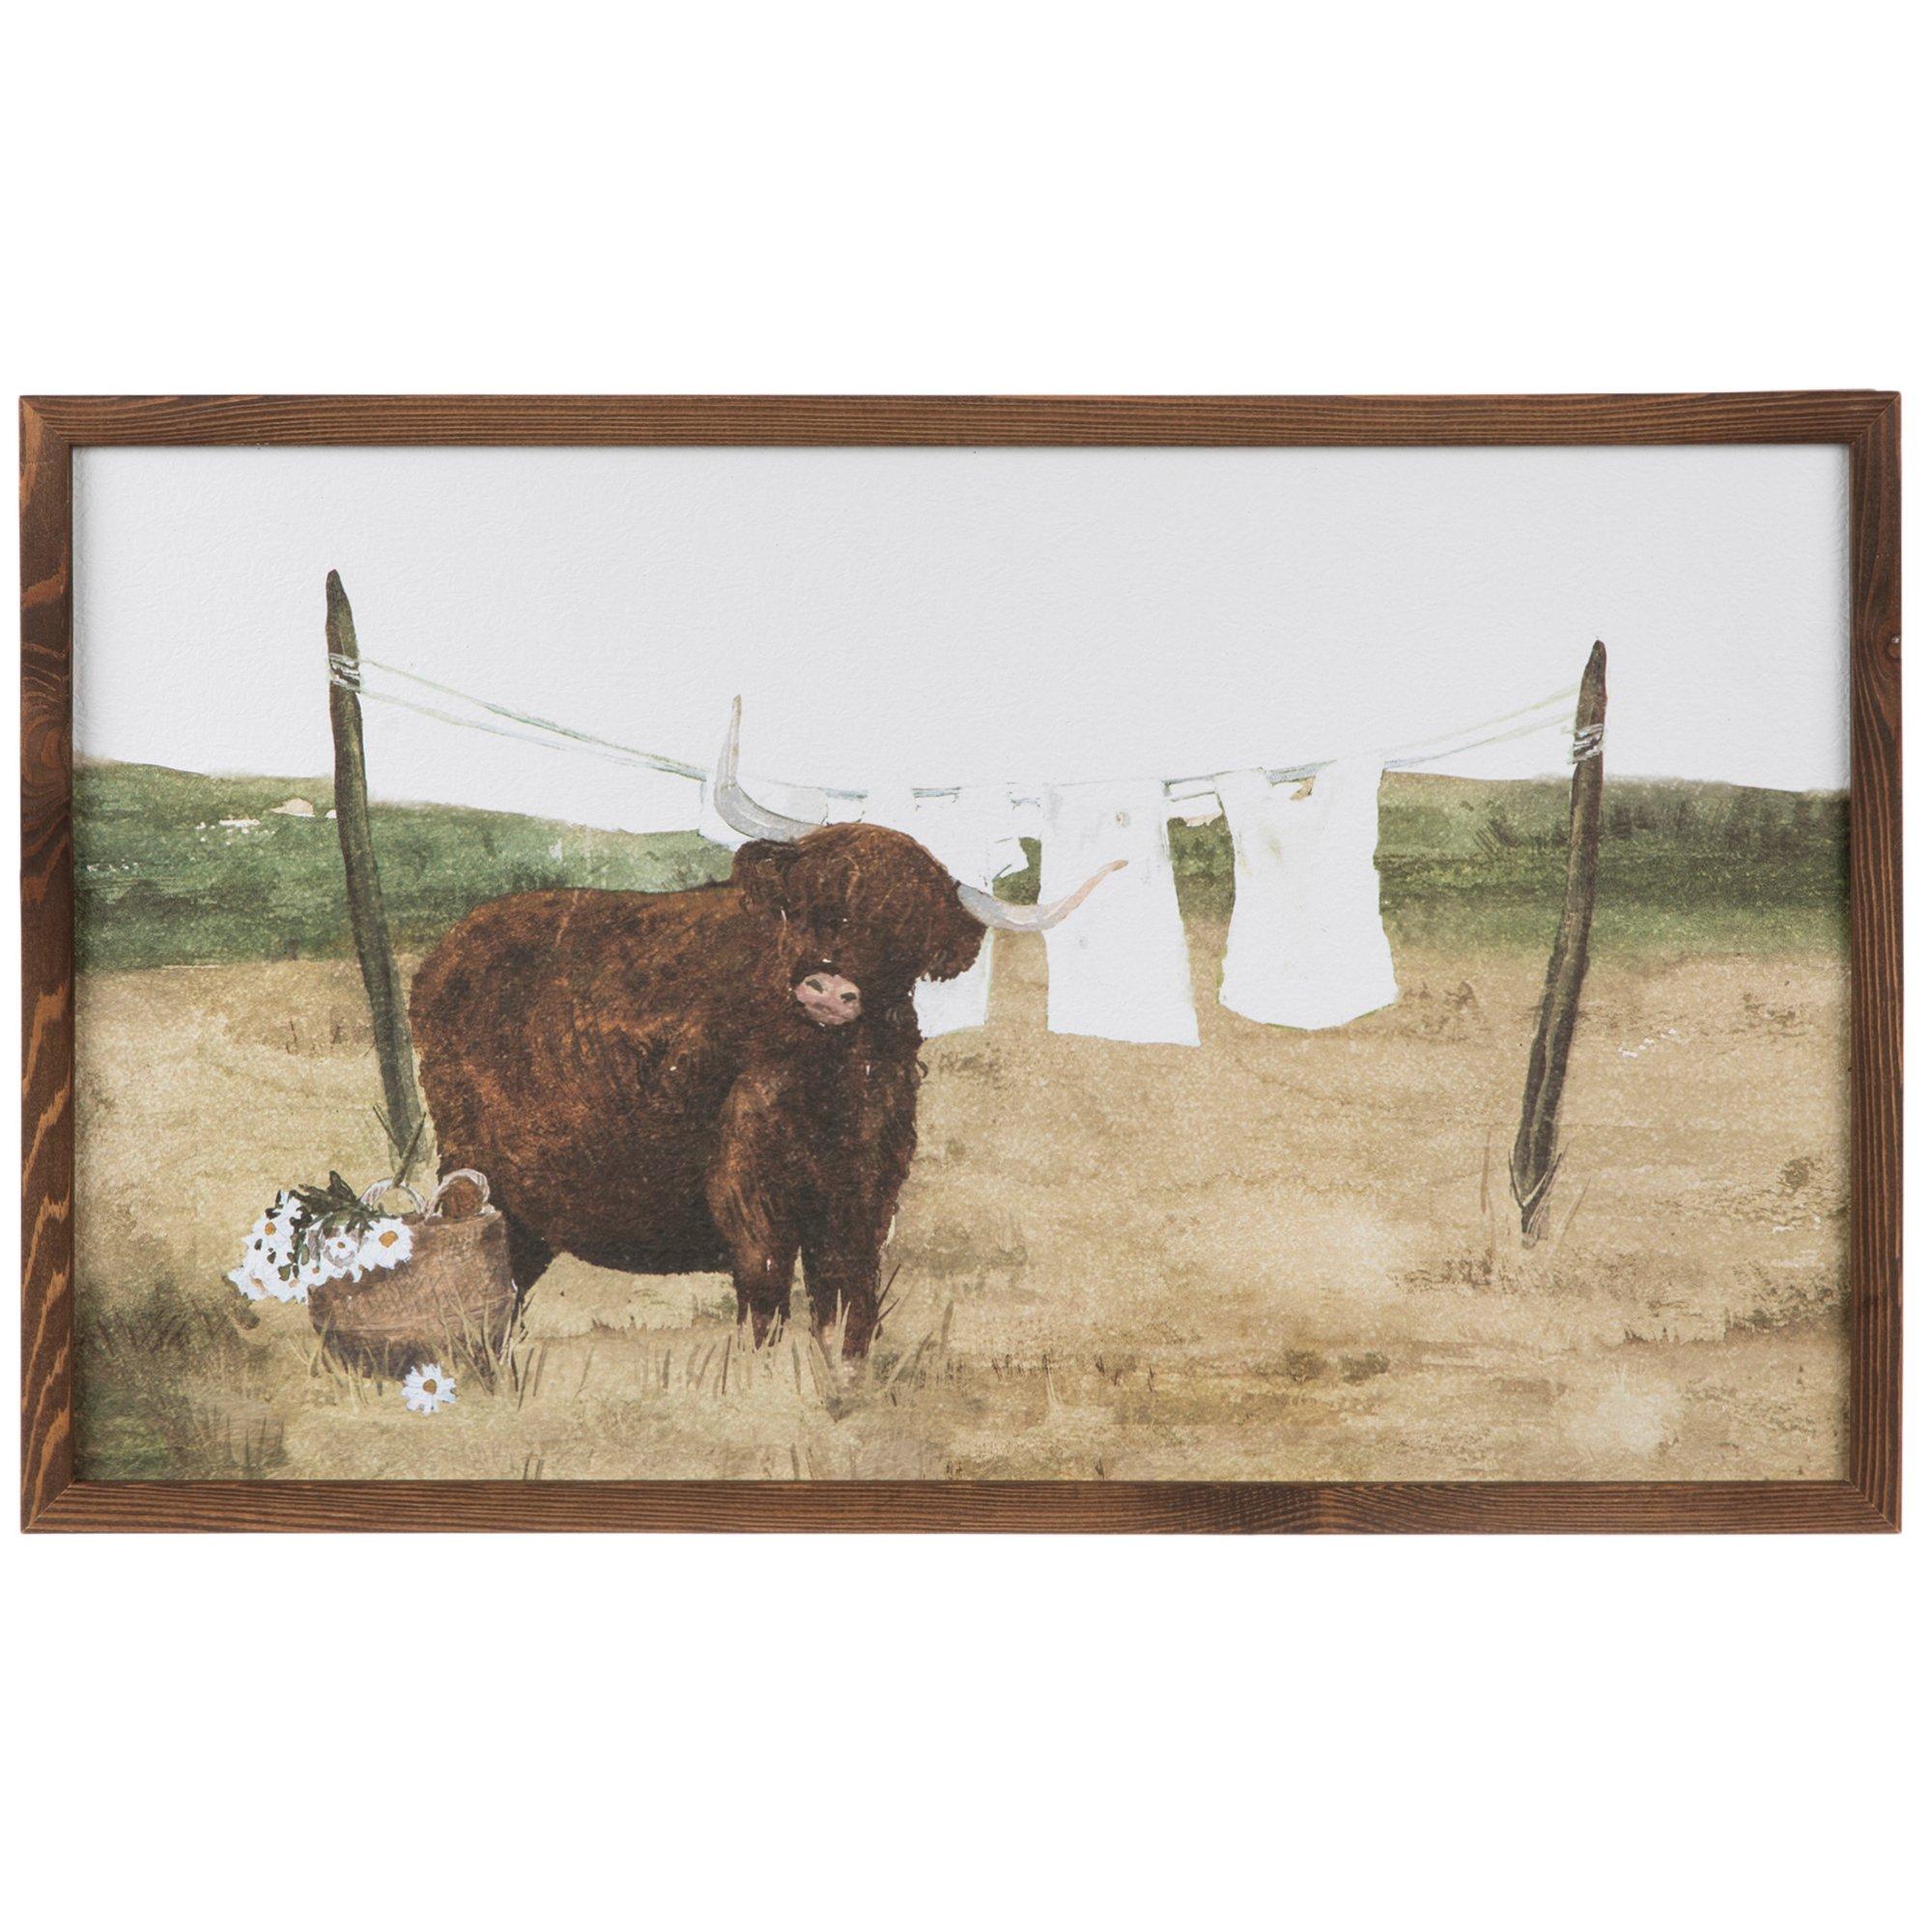 Cute Highland Cow Country Farmhouse Canvas Printing Rustic Bedroom Decor Retro Cow with Garland Wall Art Funny Home Artwork Print used in Bathroom